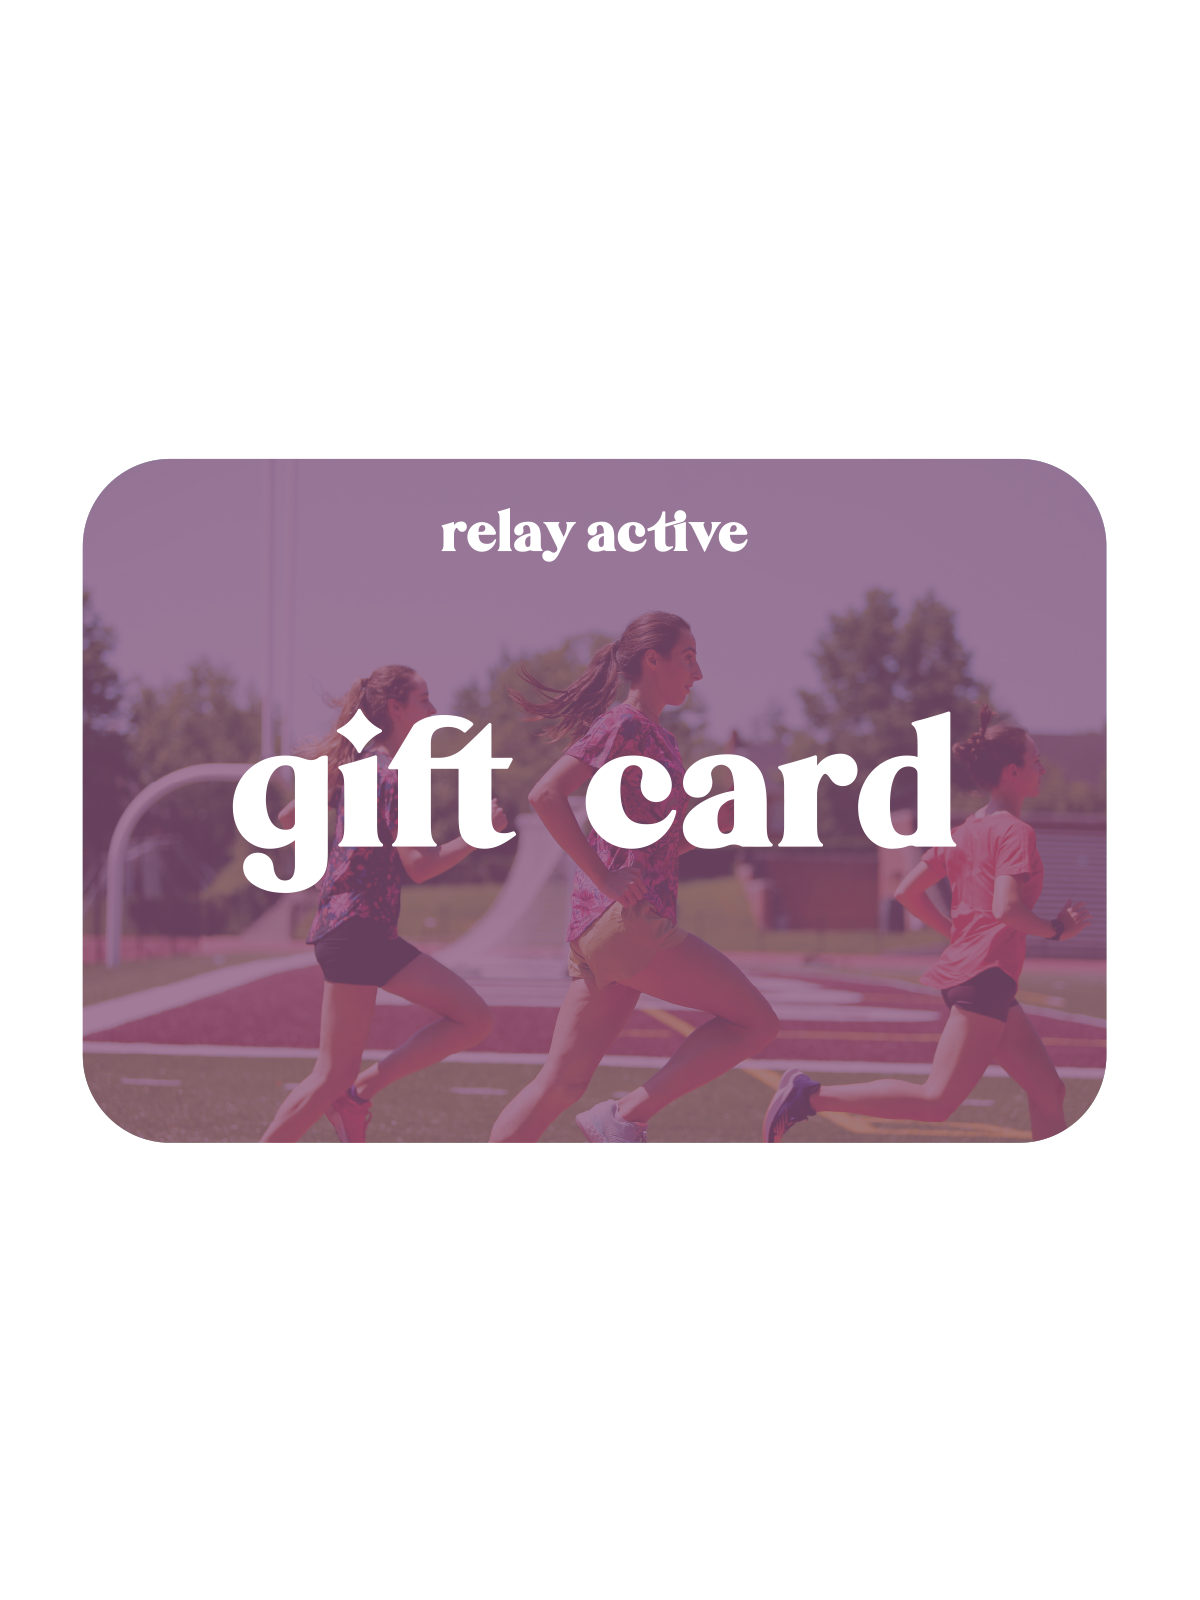 Relay Active gift card